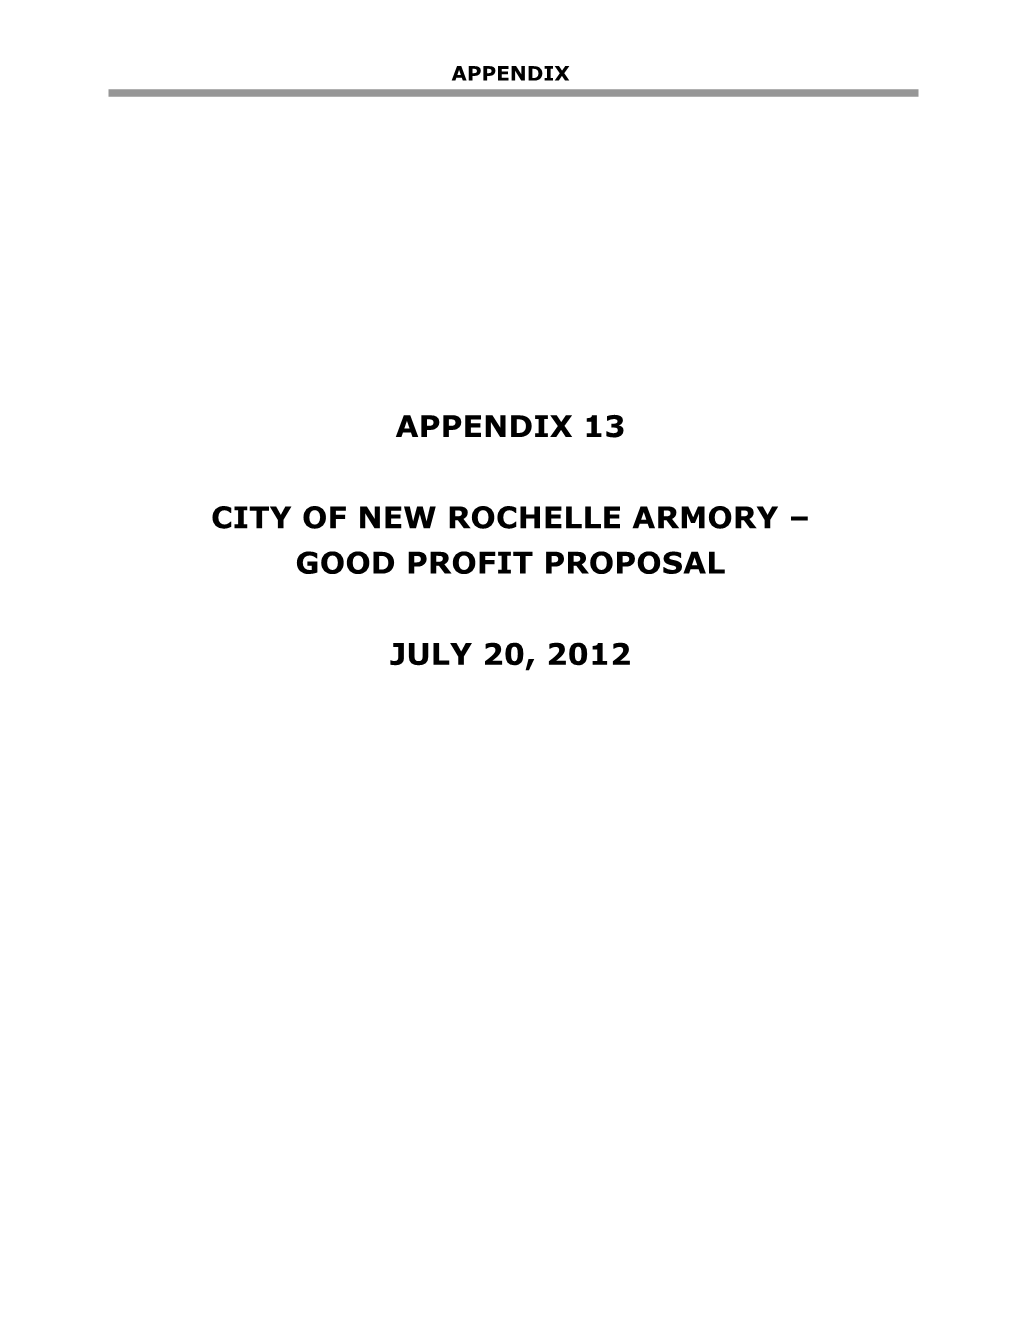 Appendix 13 City of New Rochelle Armory – Good Profit Proposal July 20, 2012